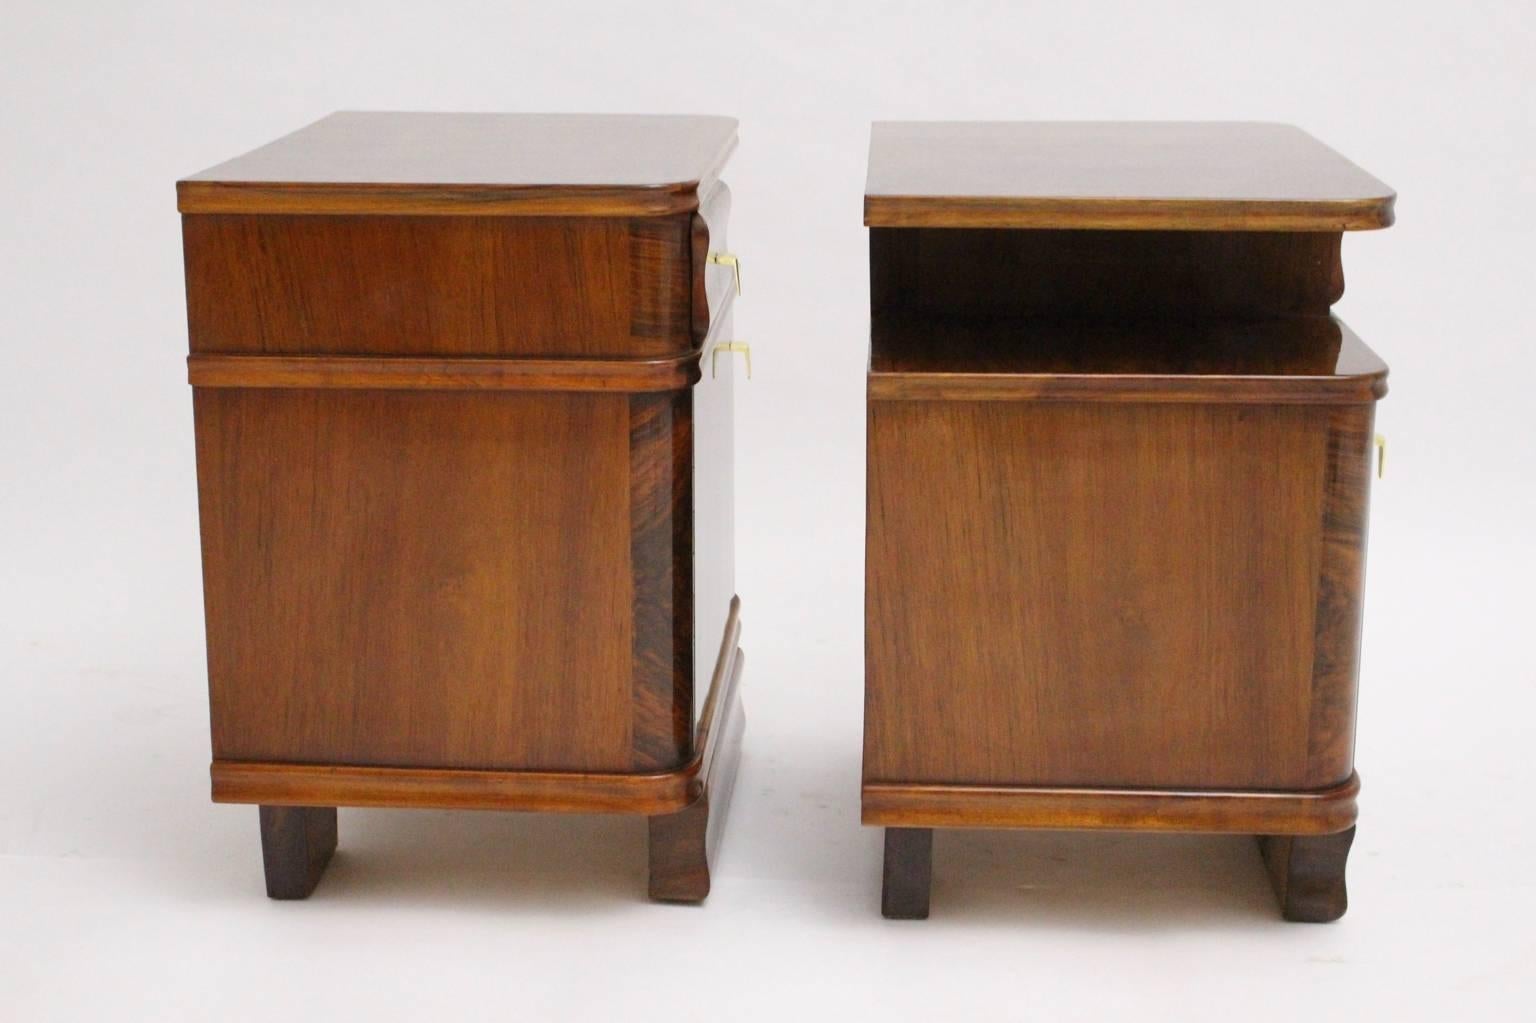 Spruce Art Deco Vintage Brown Walnut Nightstands or Small Chests Austria, 1930s